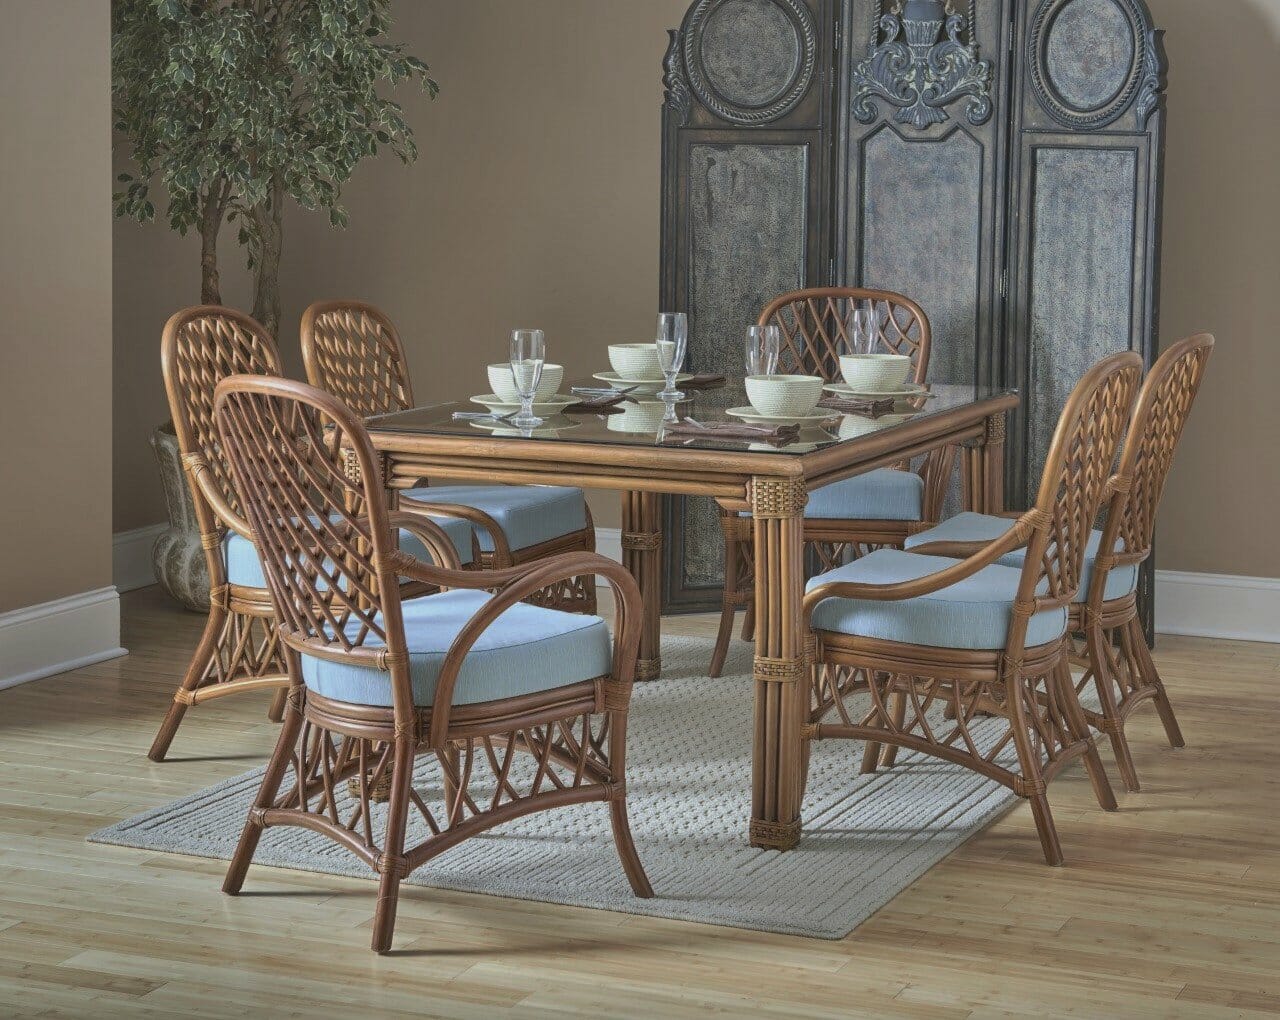 Dining Room Table With Rattan Chairs